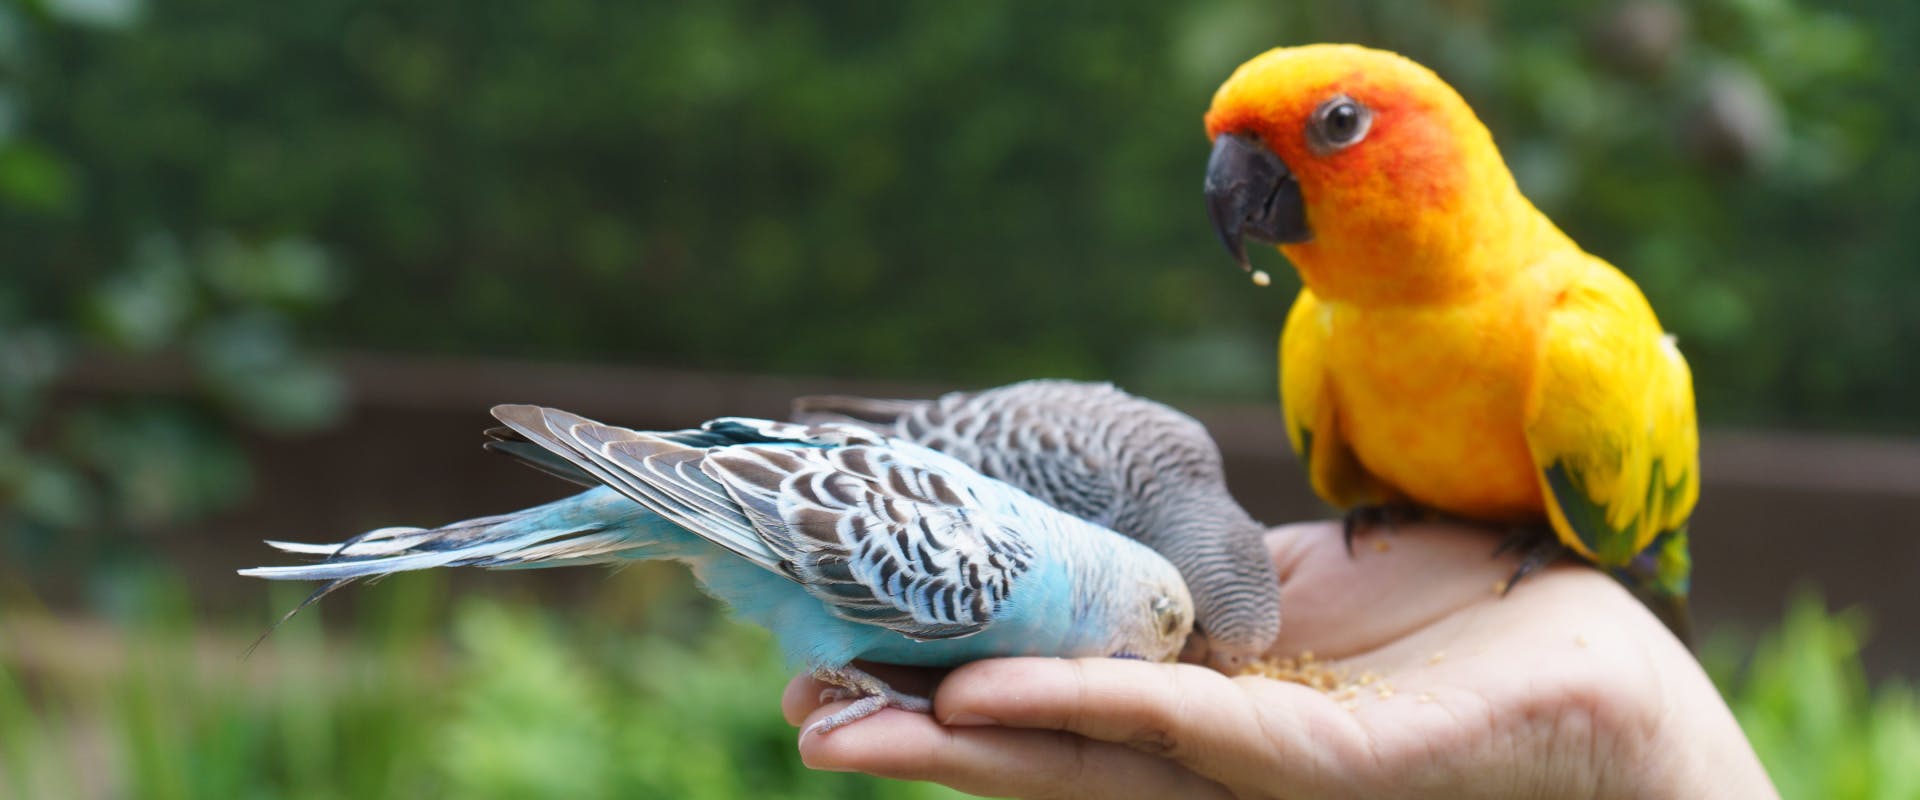 two blue and gray budgies and a yellow parakeet eating bird feed out of an open palm